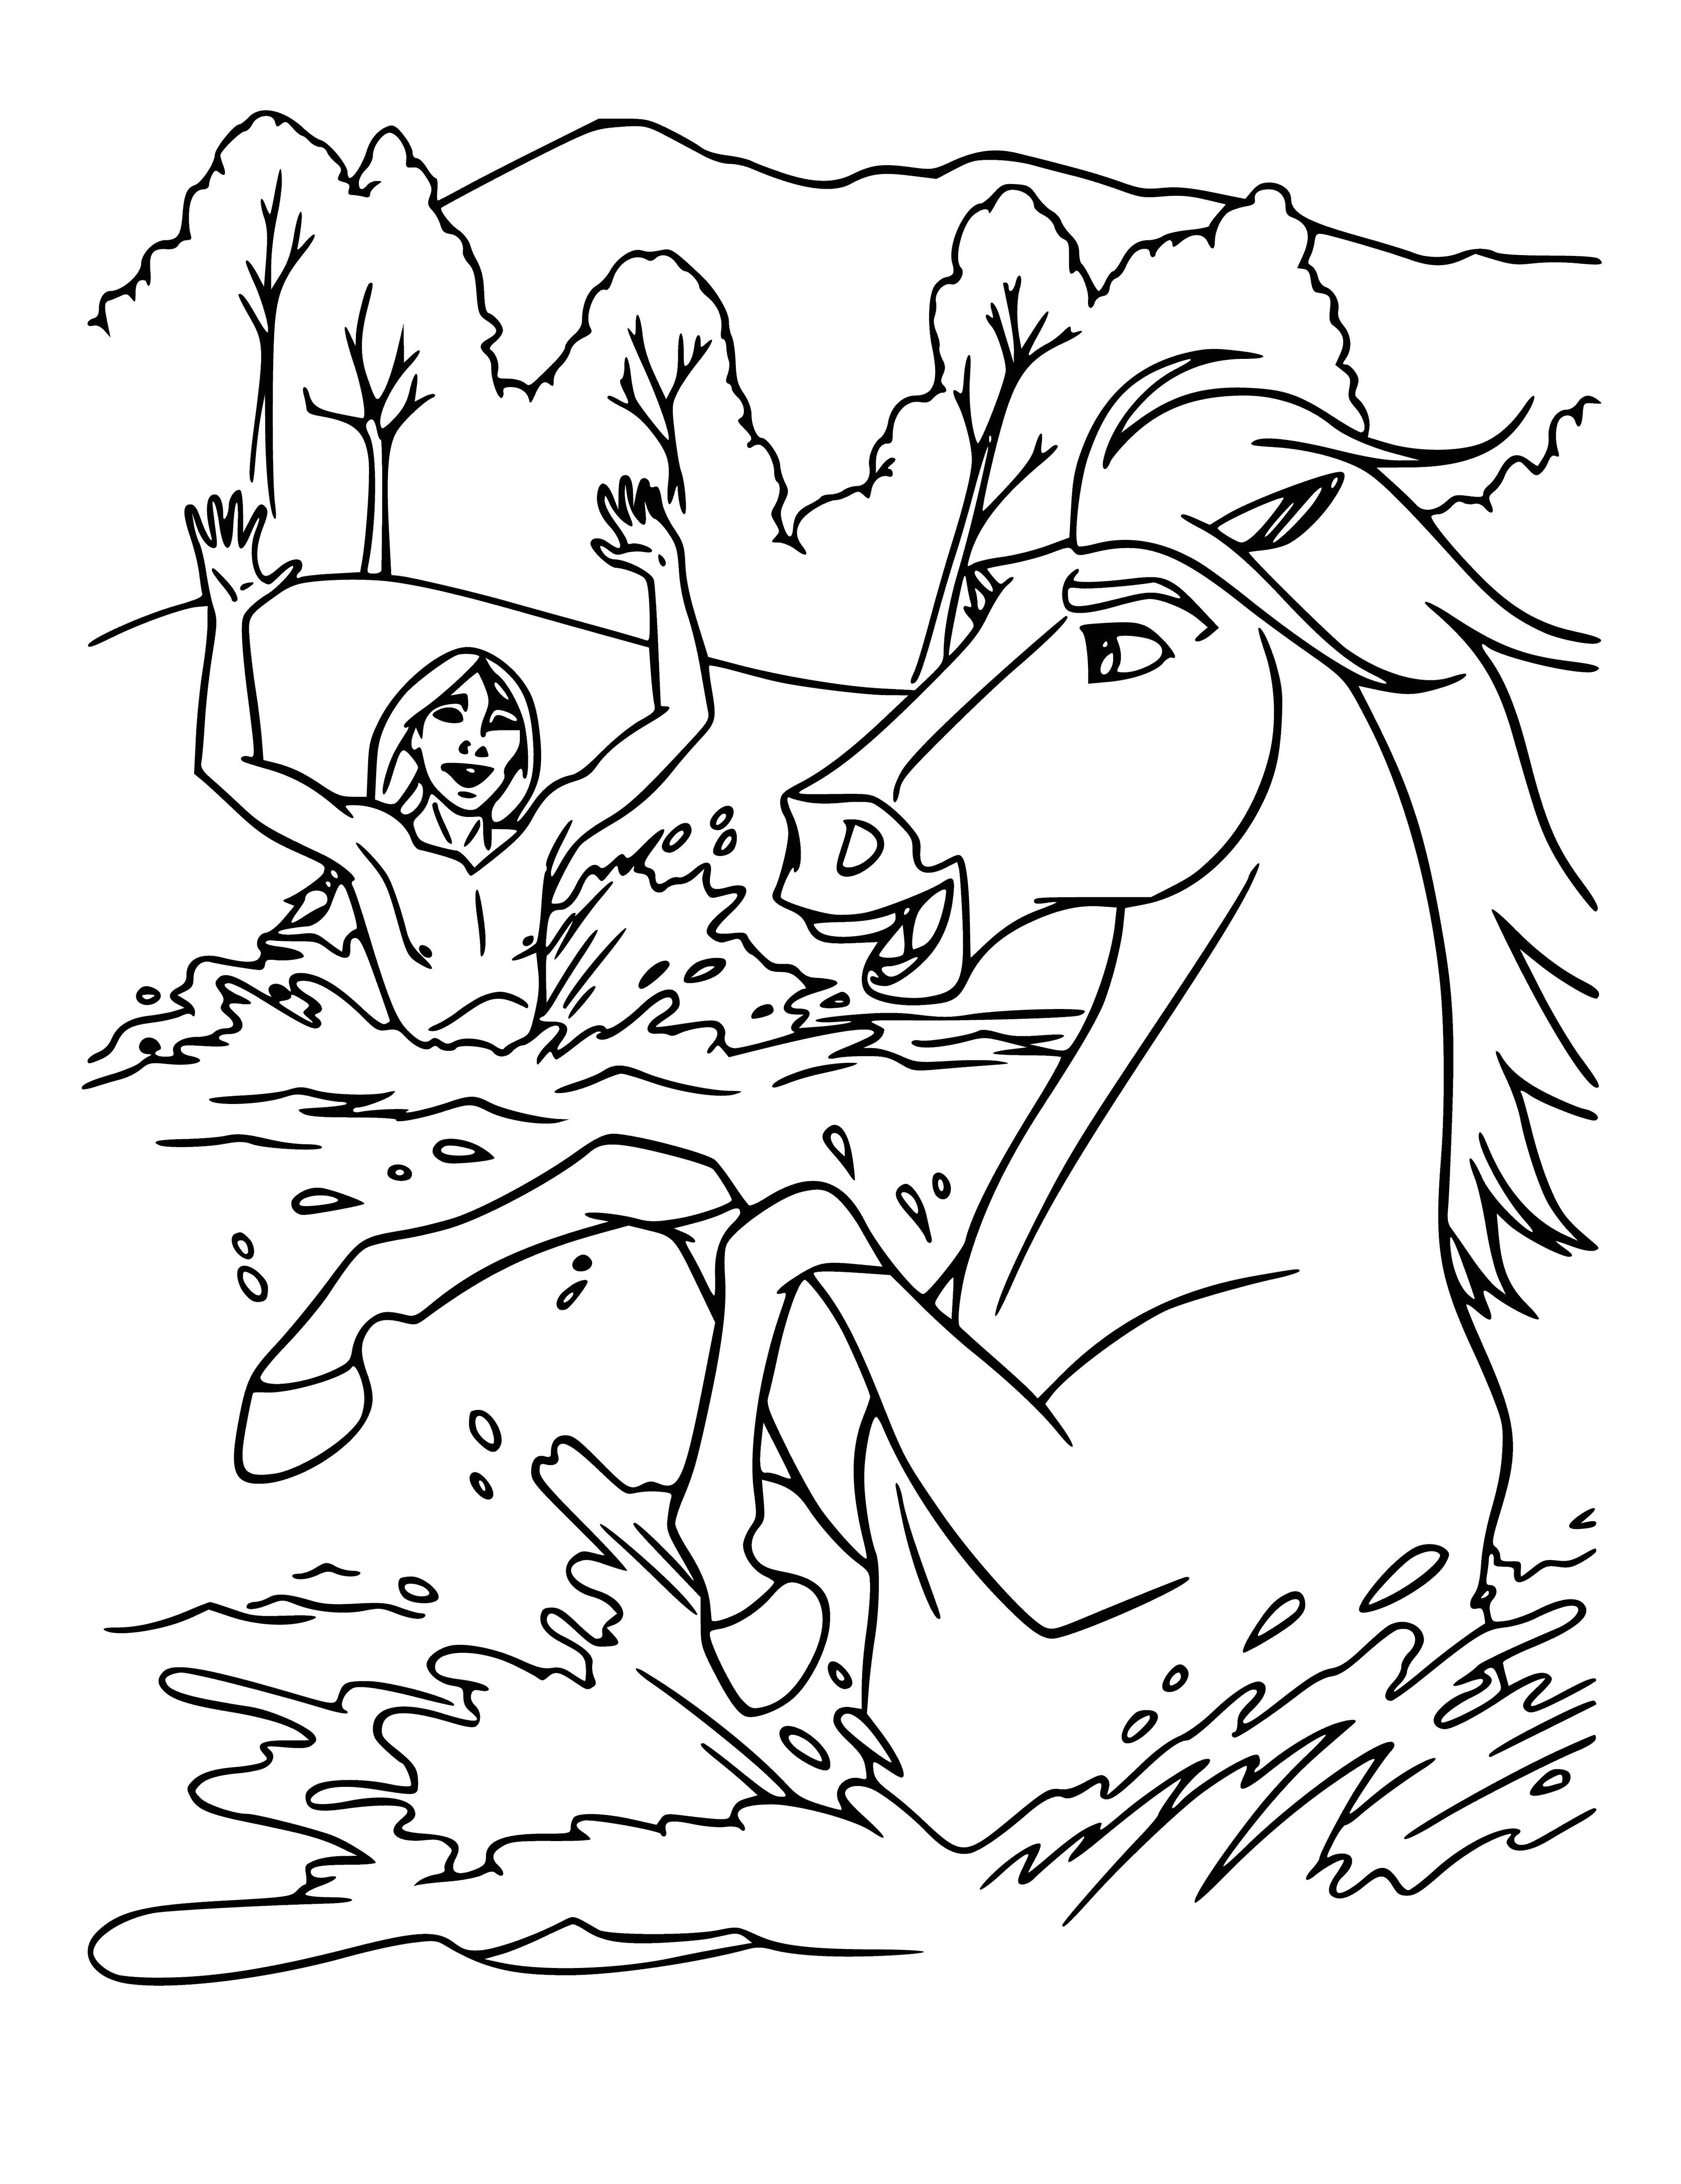 Horse bathing coloring page